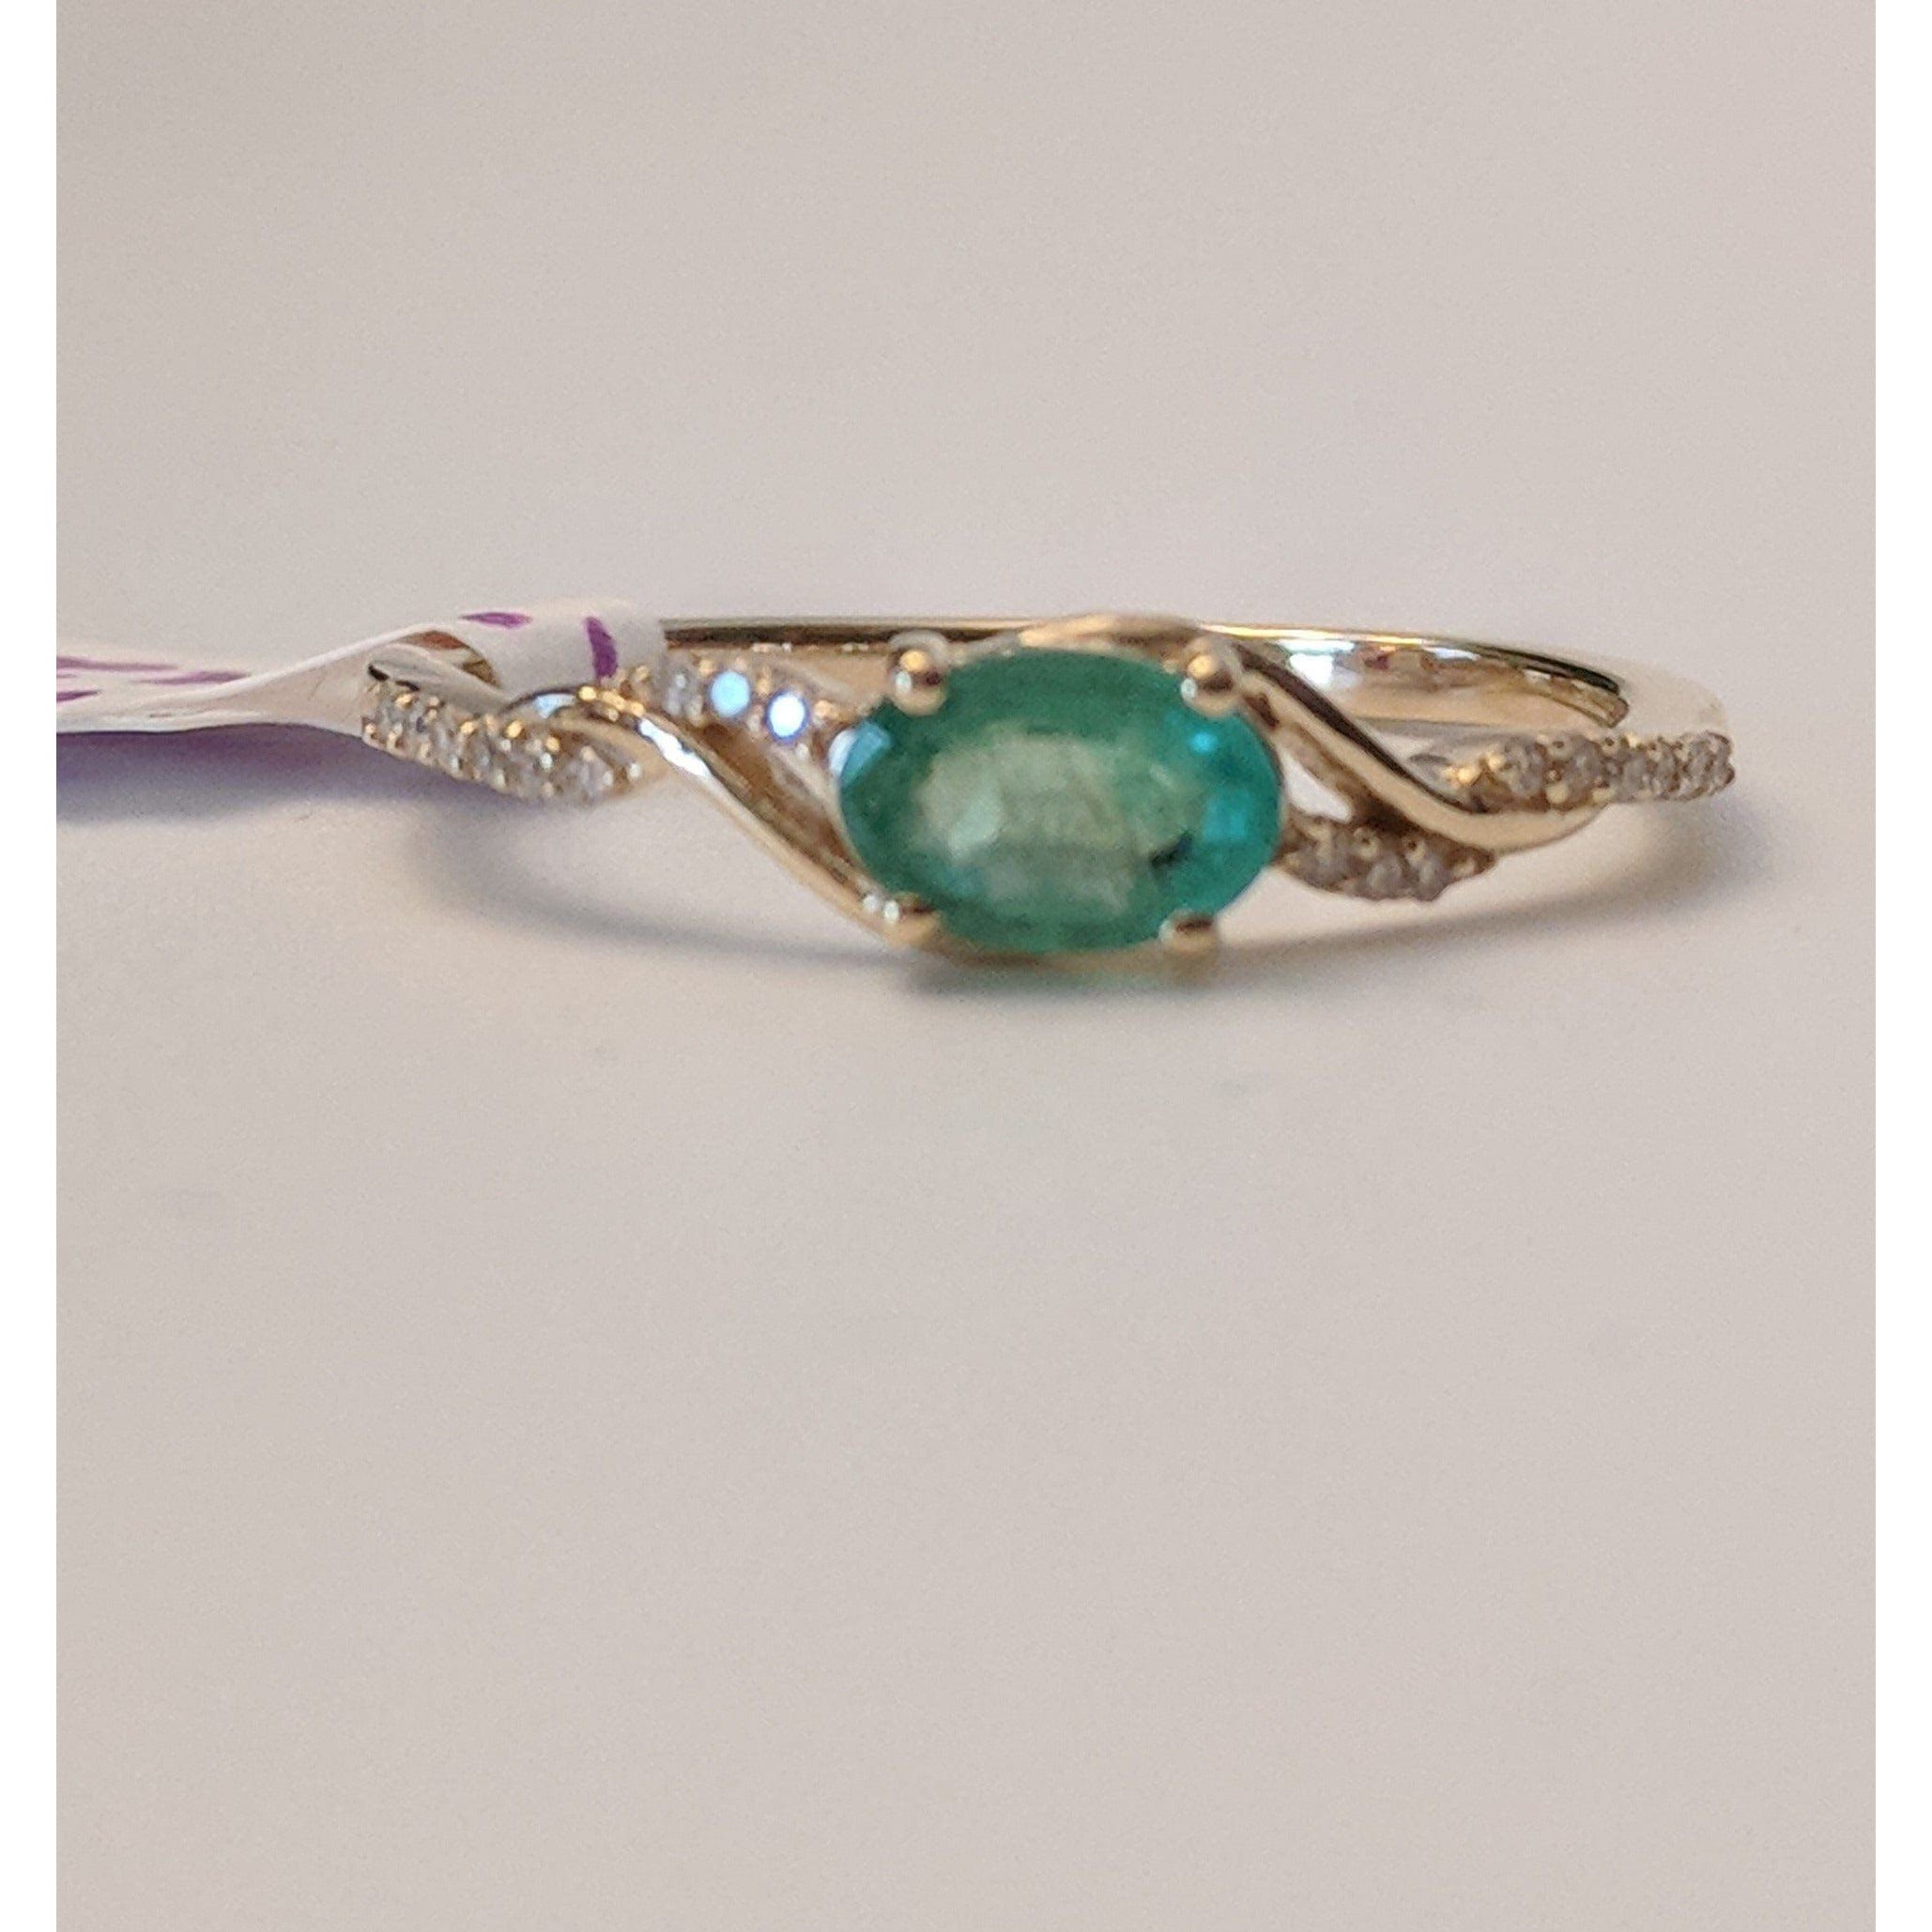 Zambian Emerald with Diamonds in 14K Gold, Exquisite yet Affordable! - The Pink Pigs, A Compassionate Boutique